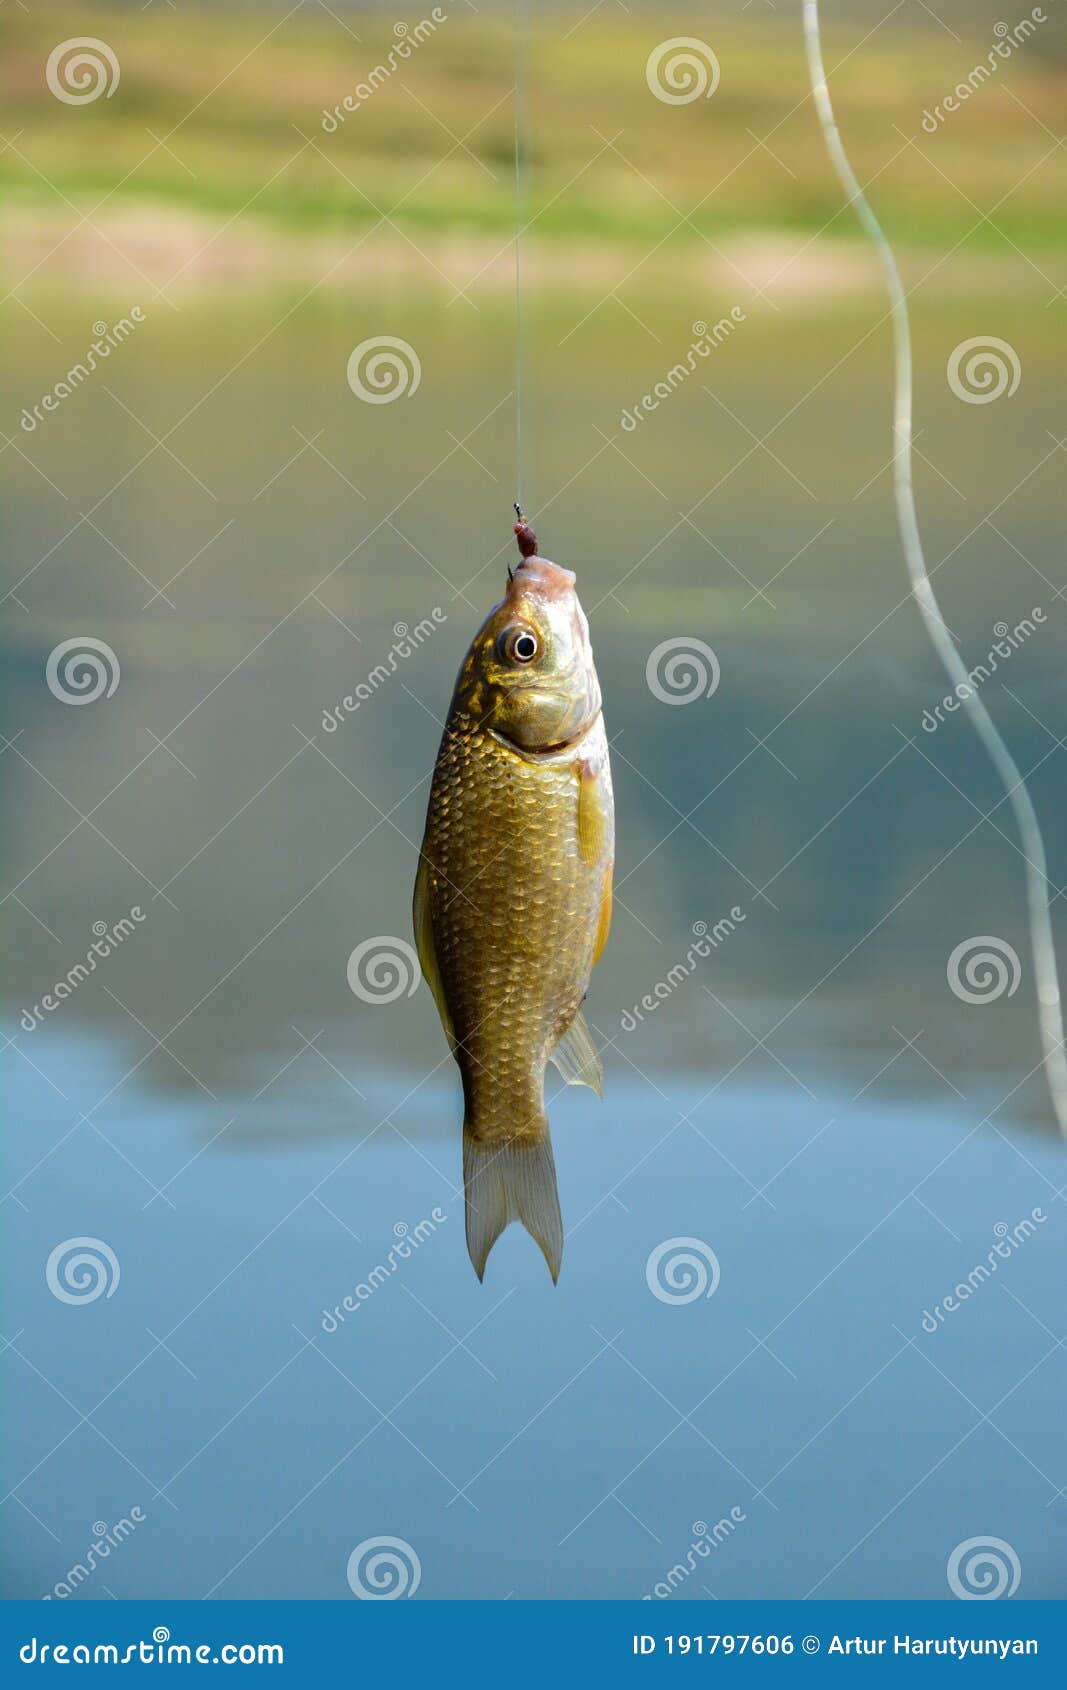 the fish pecked the fishing rod